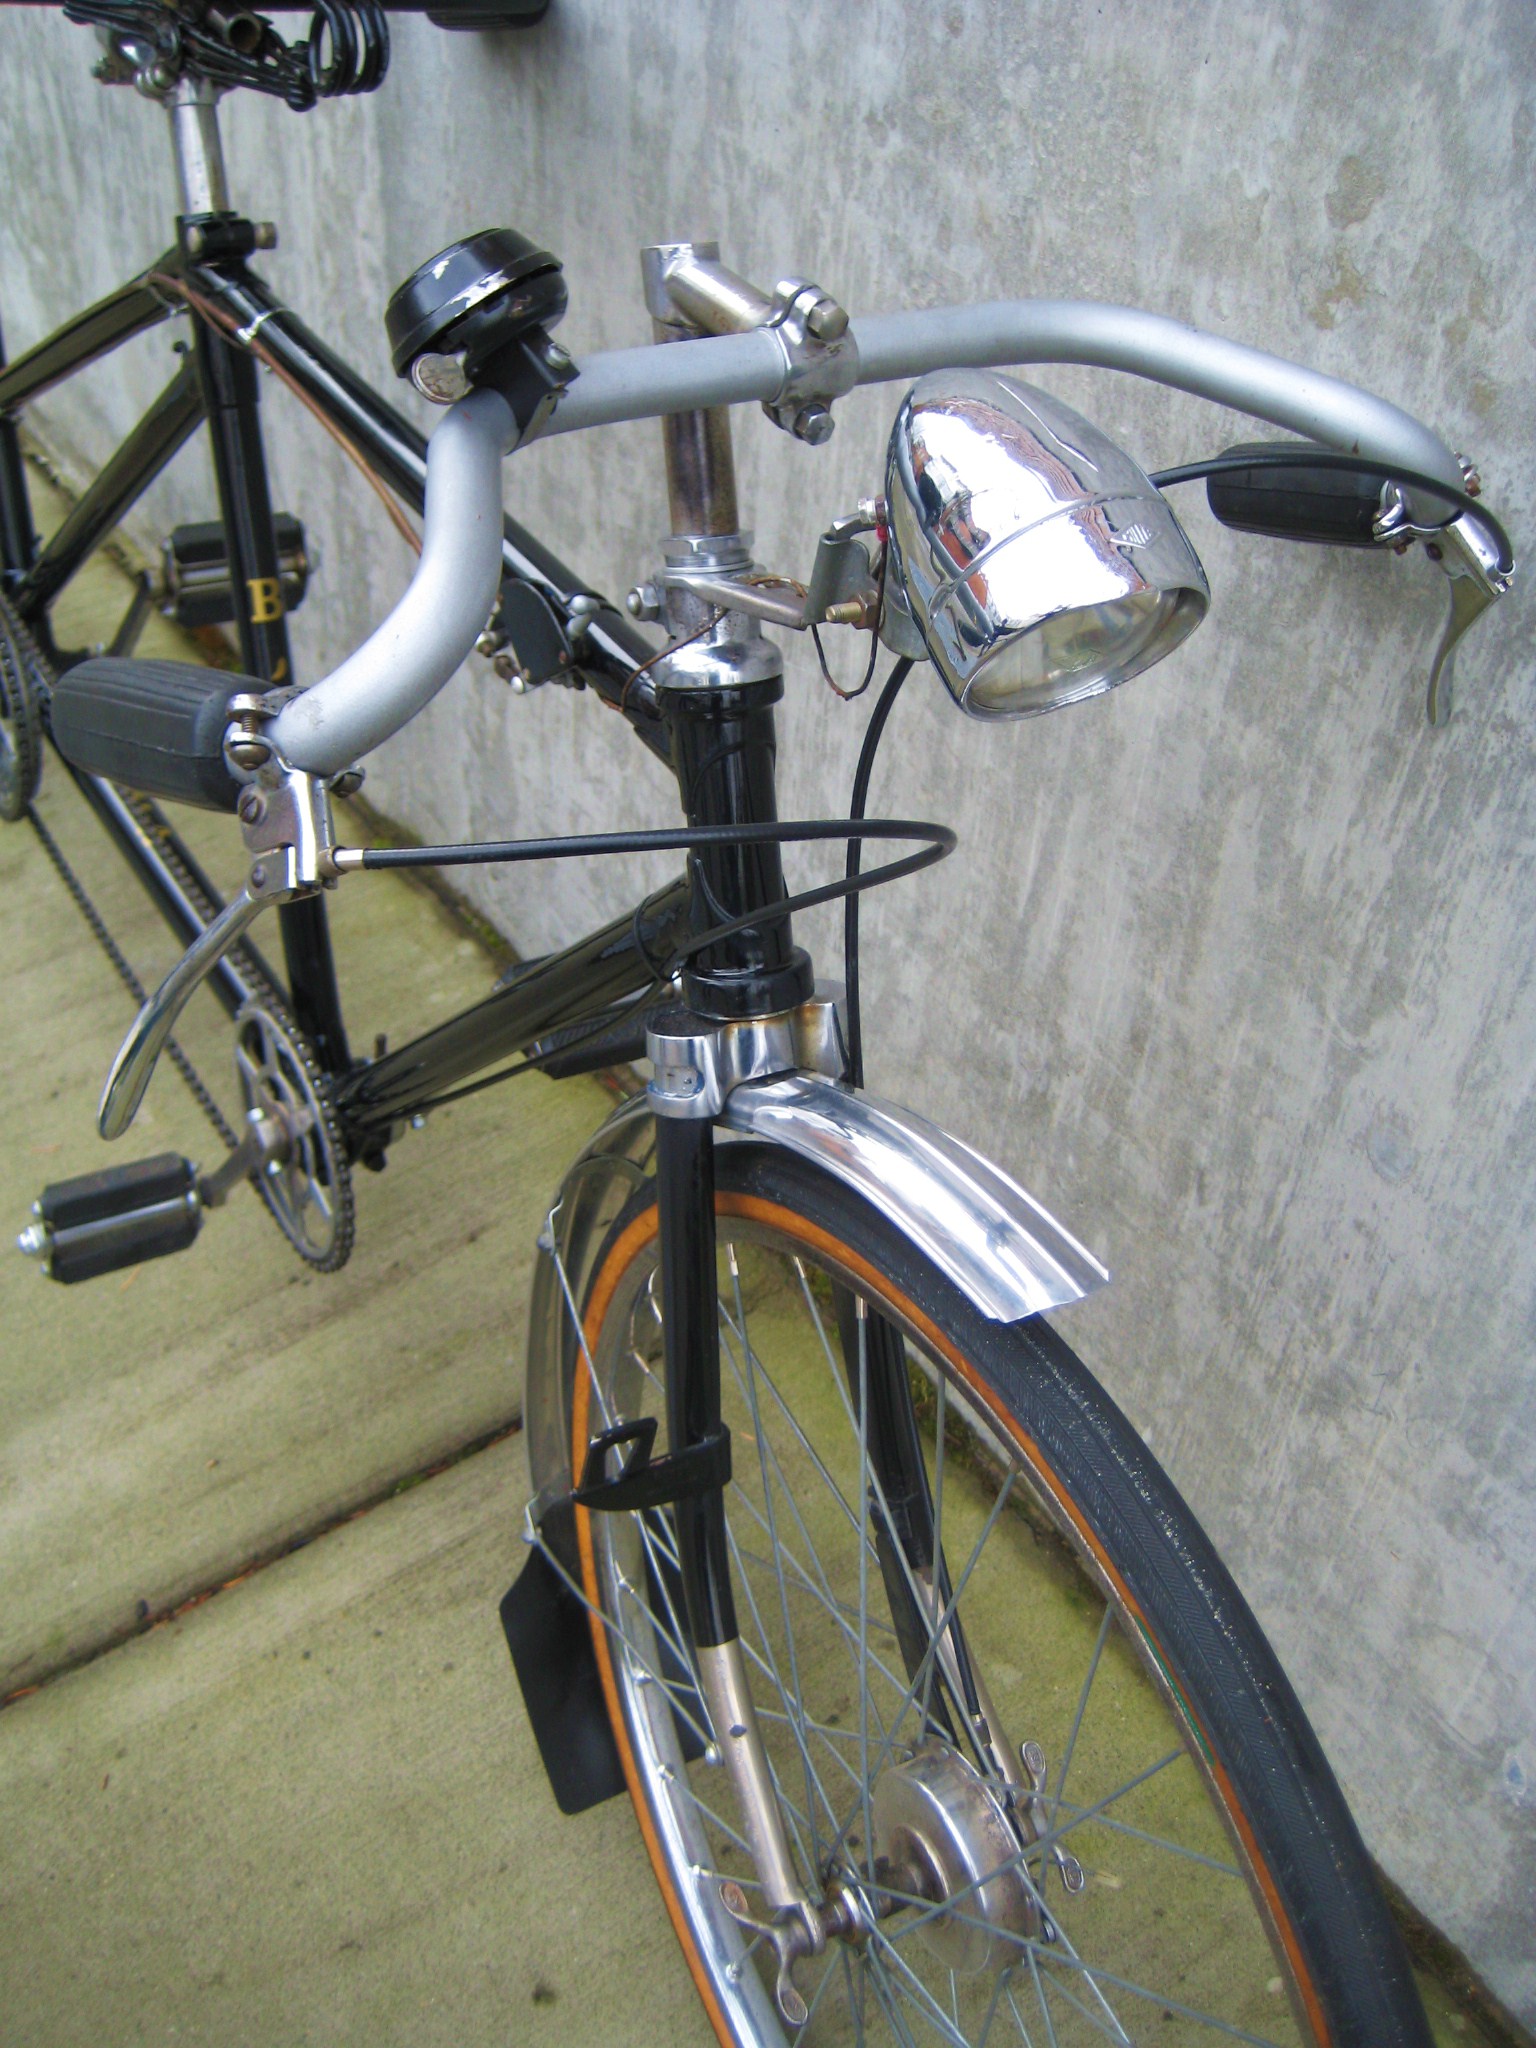 bsa cycle with gear